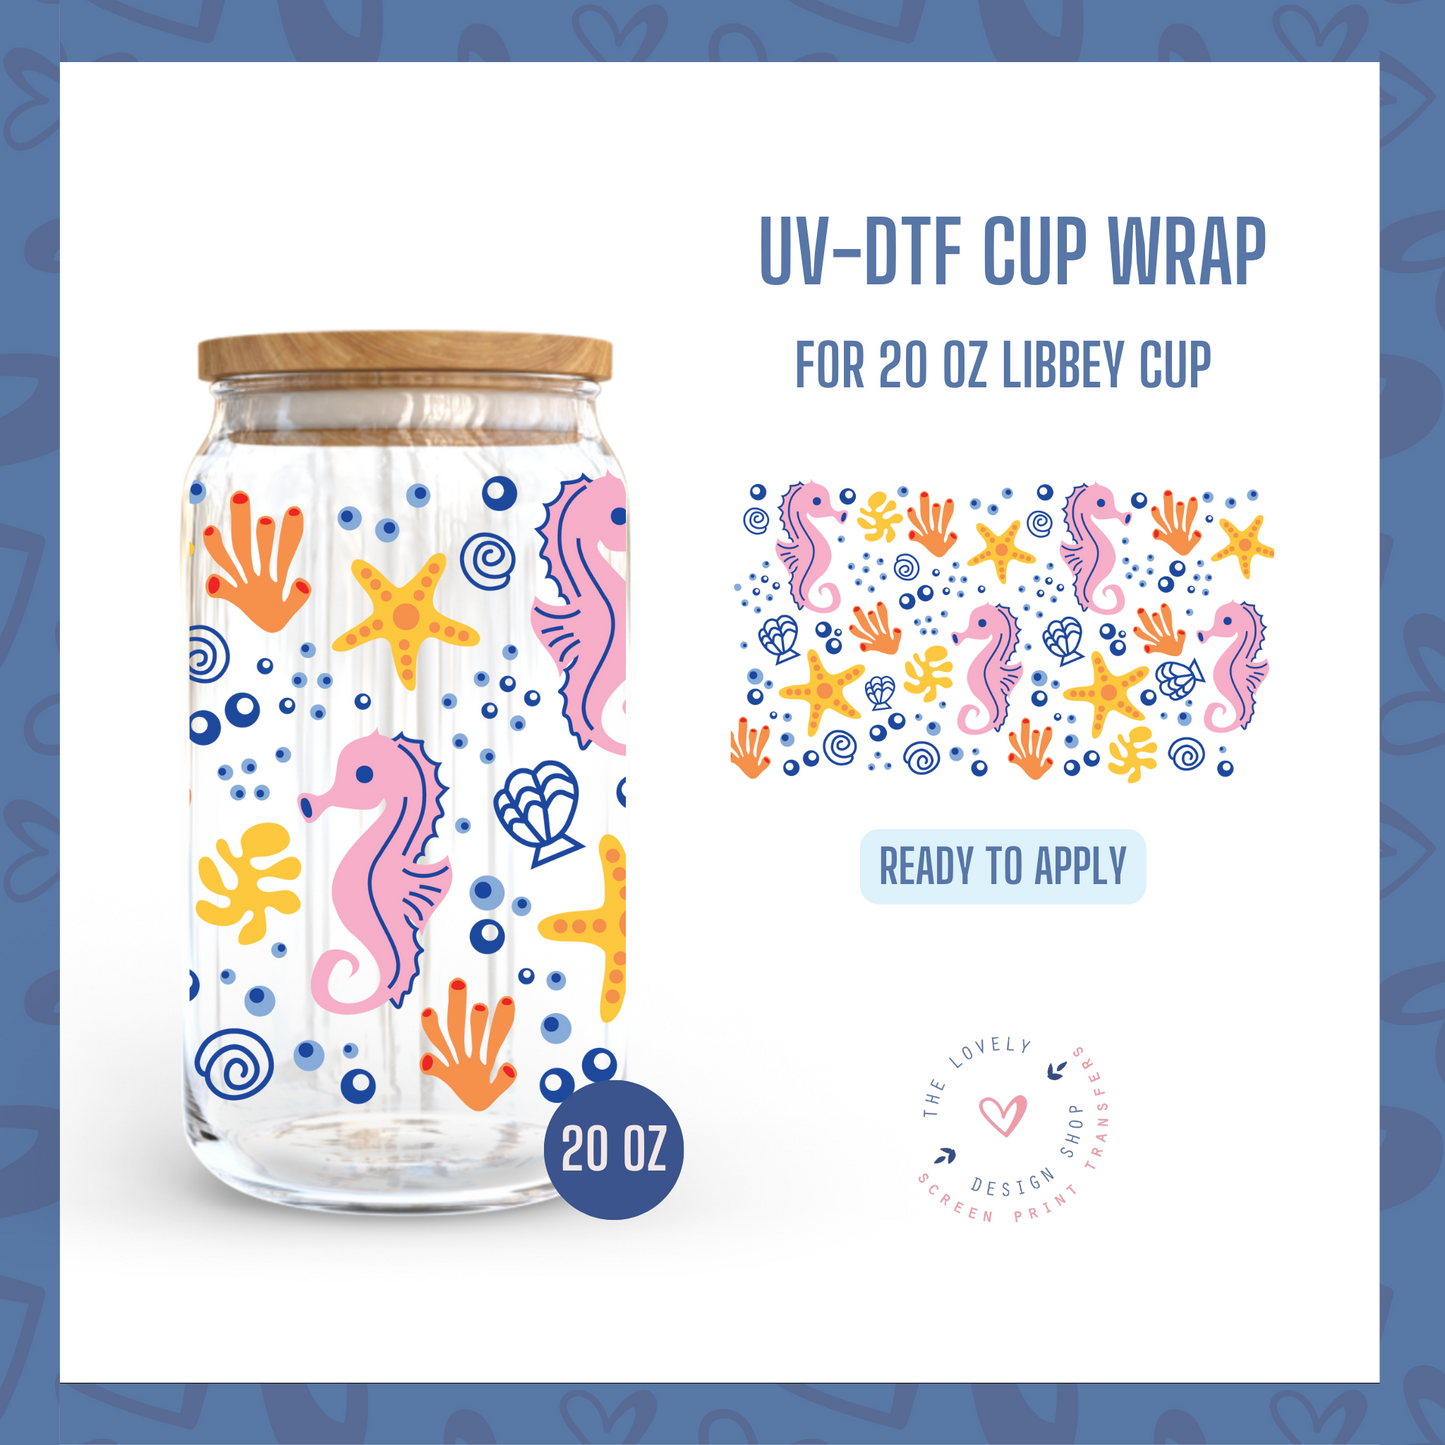 Under The Sea - UV DTF 20 oz Libbey Cup Wrap (Ready to Ship) Apr 1